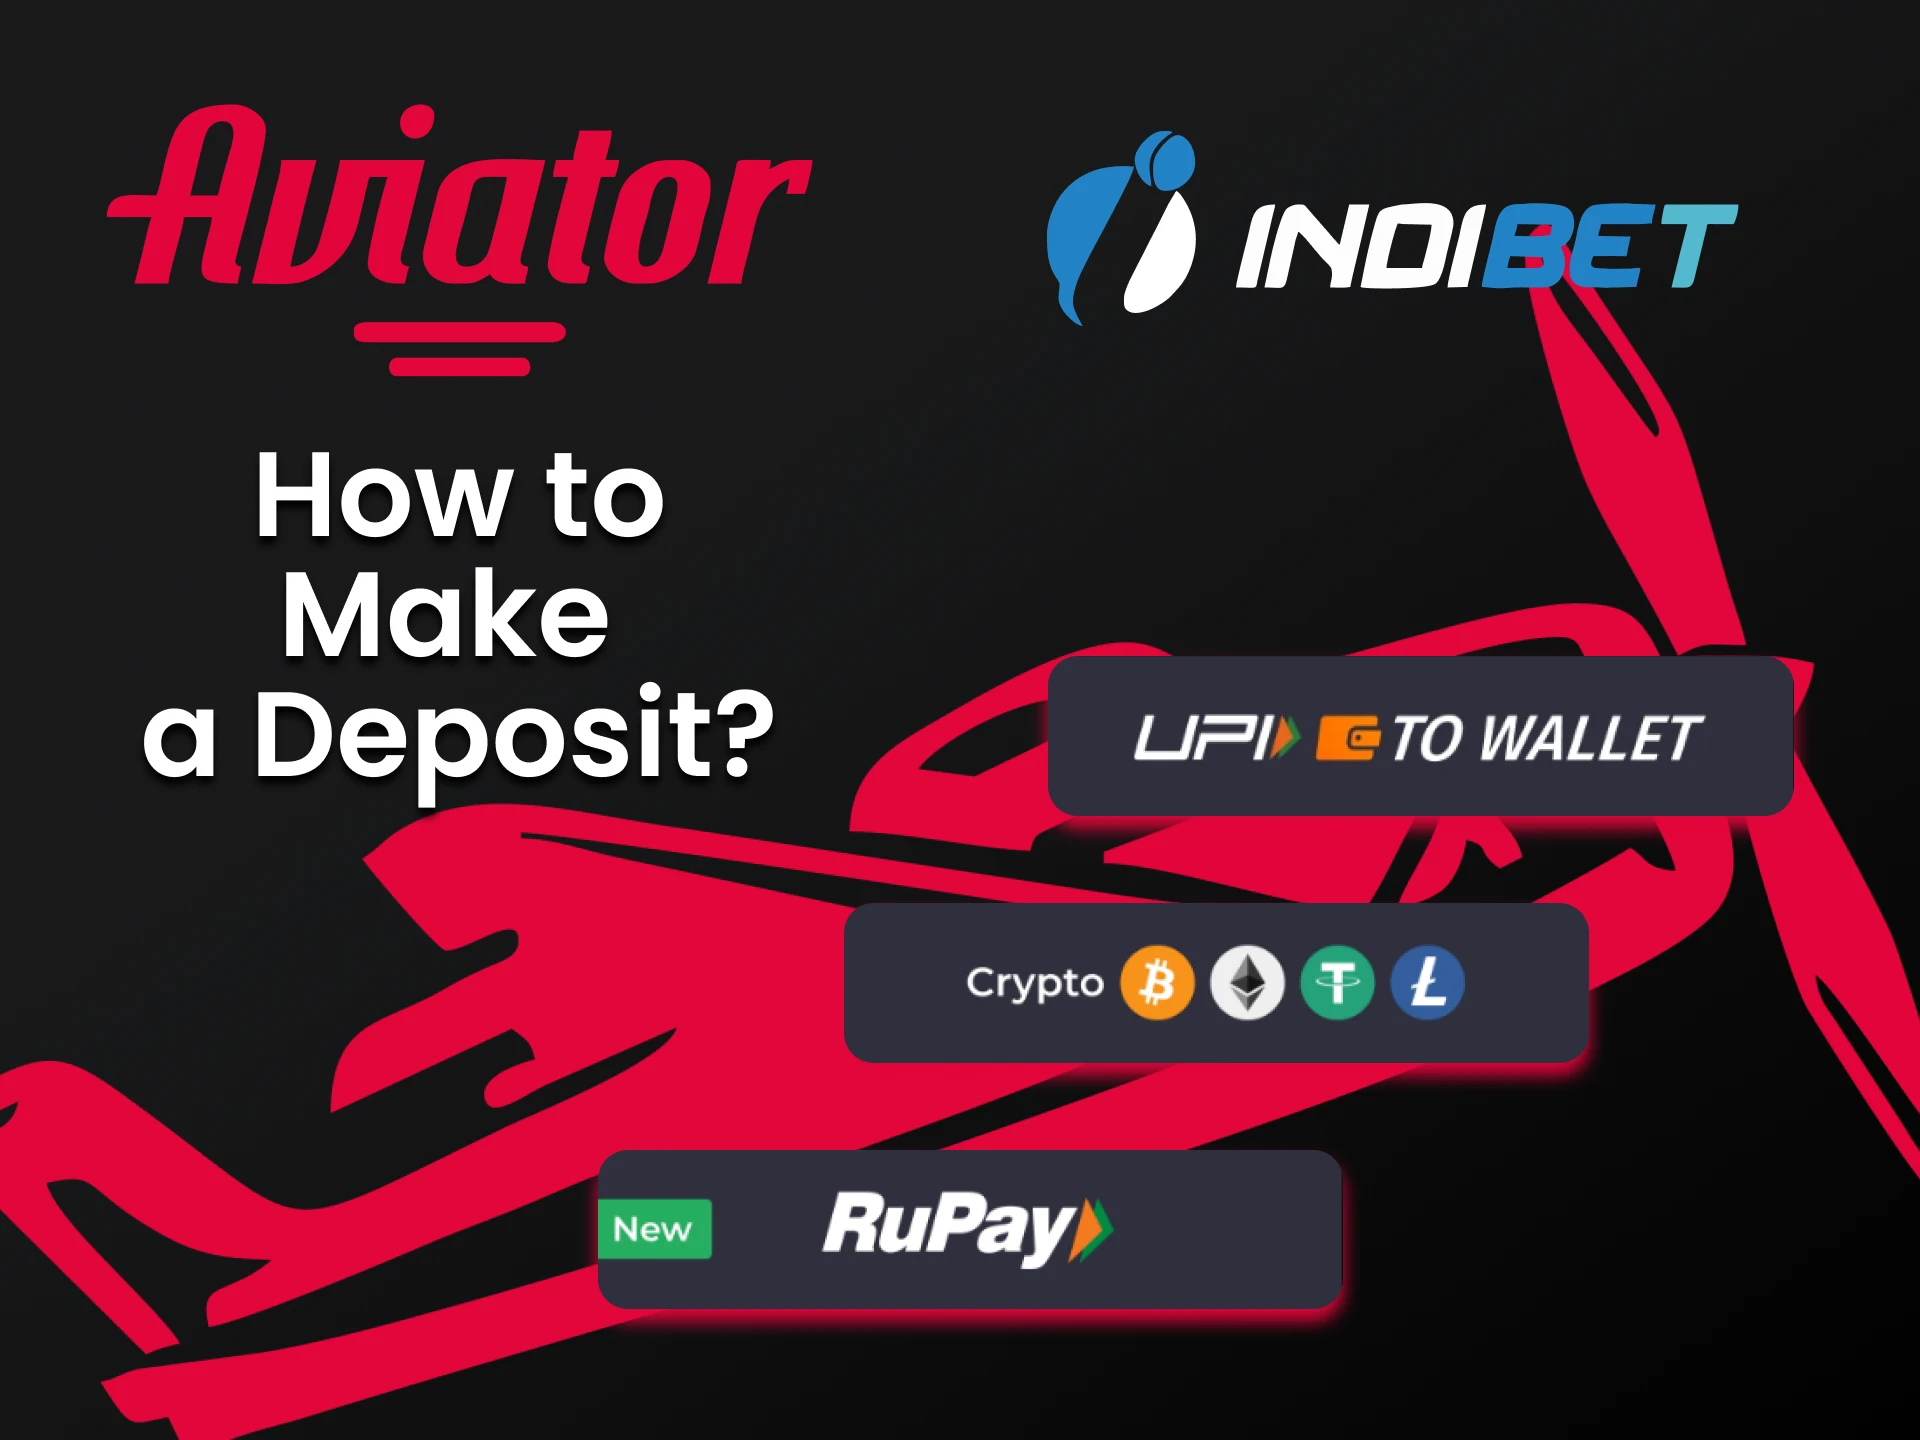 Indibet has a variety of deposit options for Aviator.